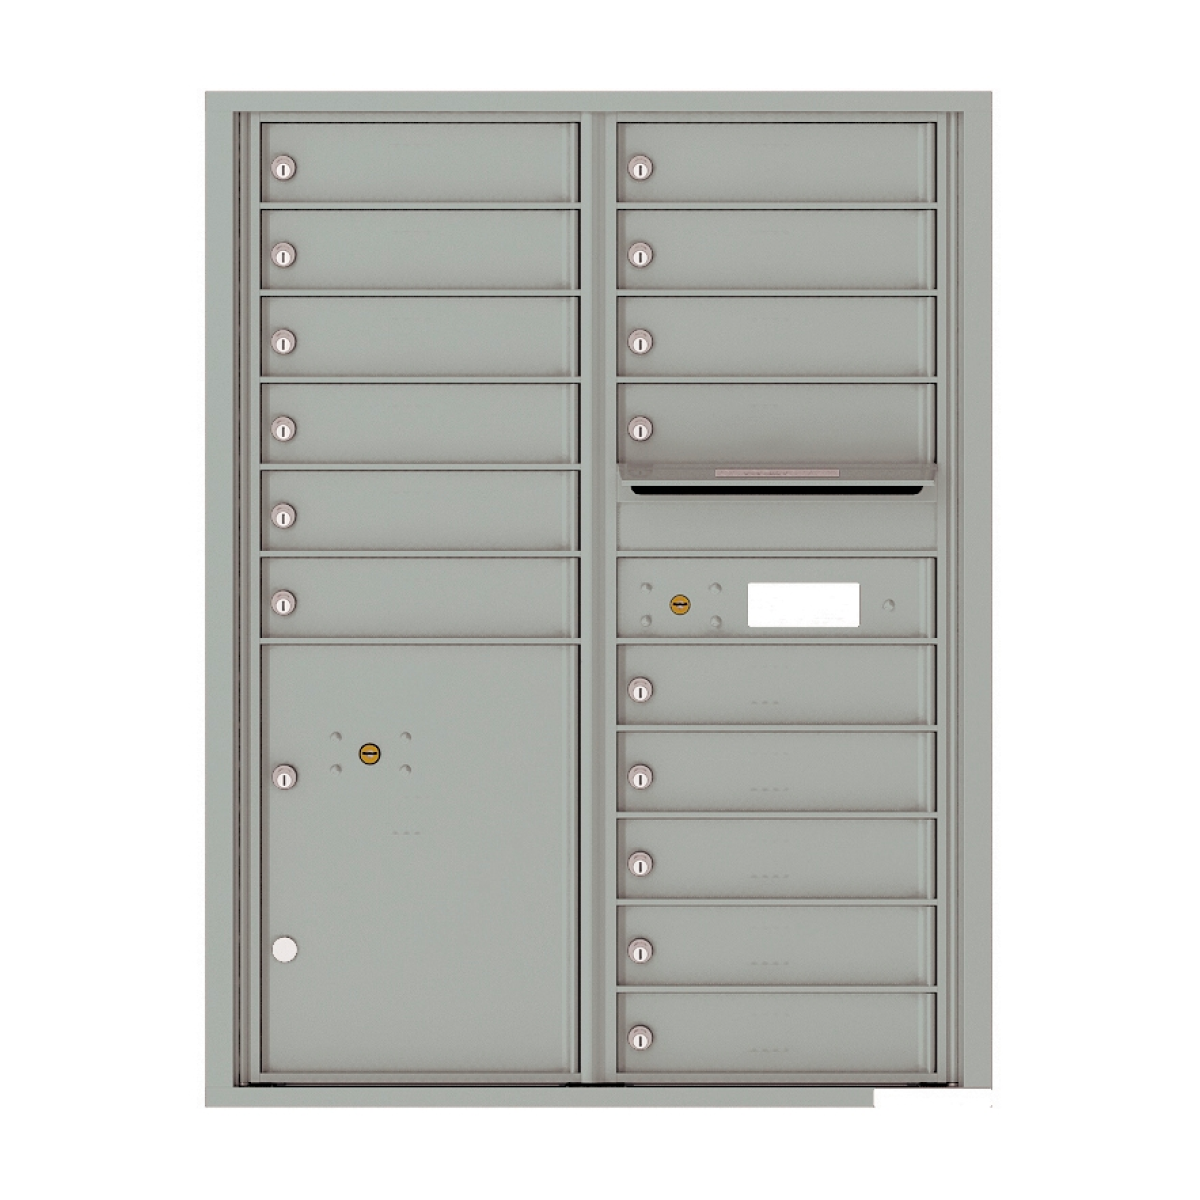 Recessed 4C Horizontal Mailbox – 15 Doors 1 Parcel Locker – Front Loading – 4C11D-15-CK25750 – Private Delivery Product Image